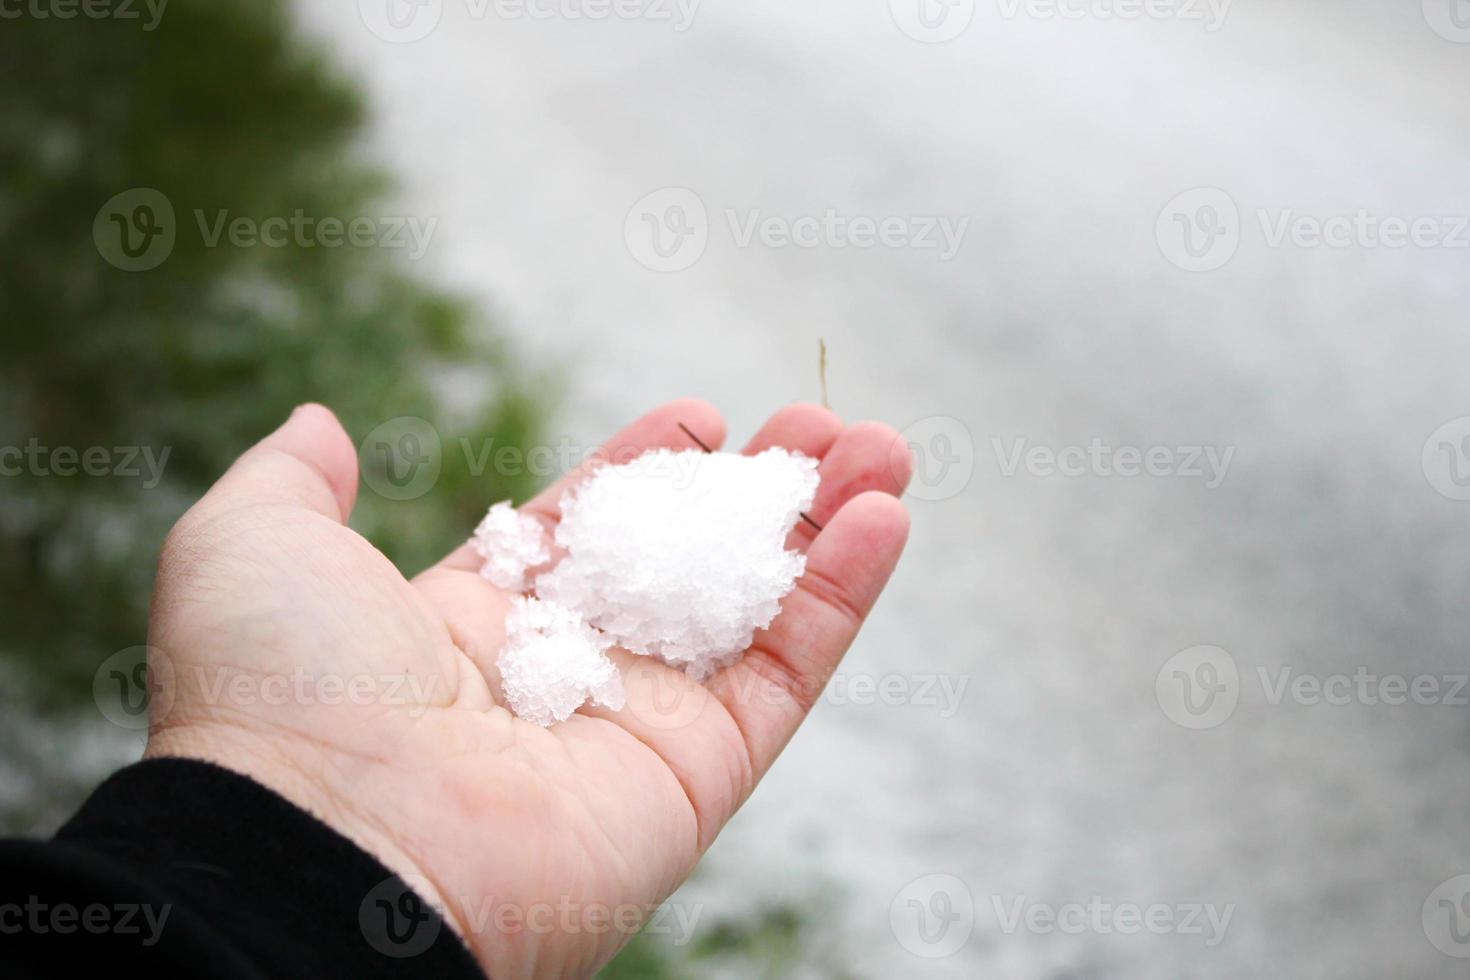 A man's hand holding snow in his hand after it snows against a snow-covered road in the background. photo